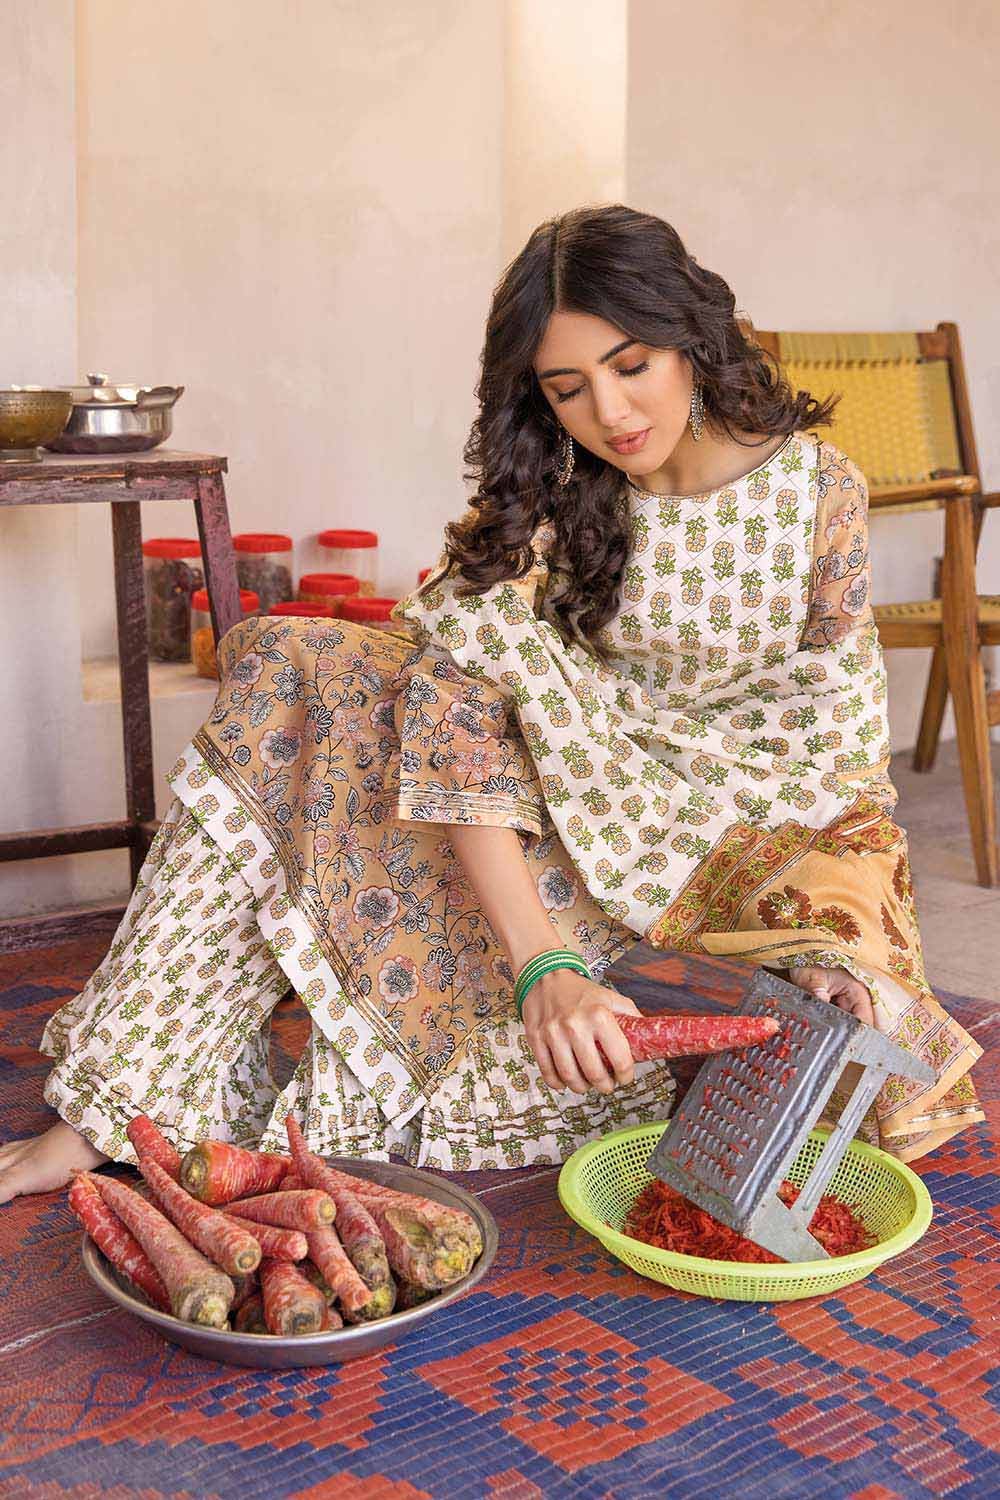 Gul Ahmed 3PC Lawn Unstitched Printed Suit CL-32235 A